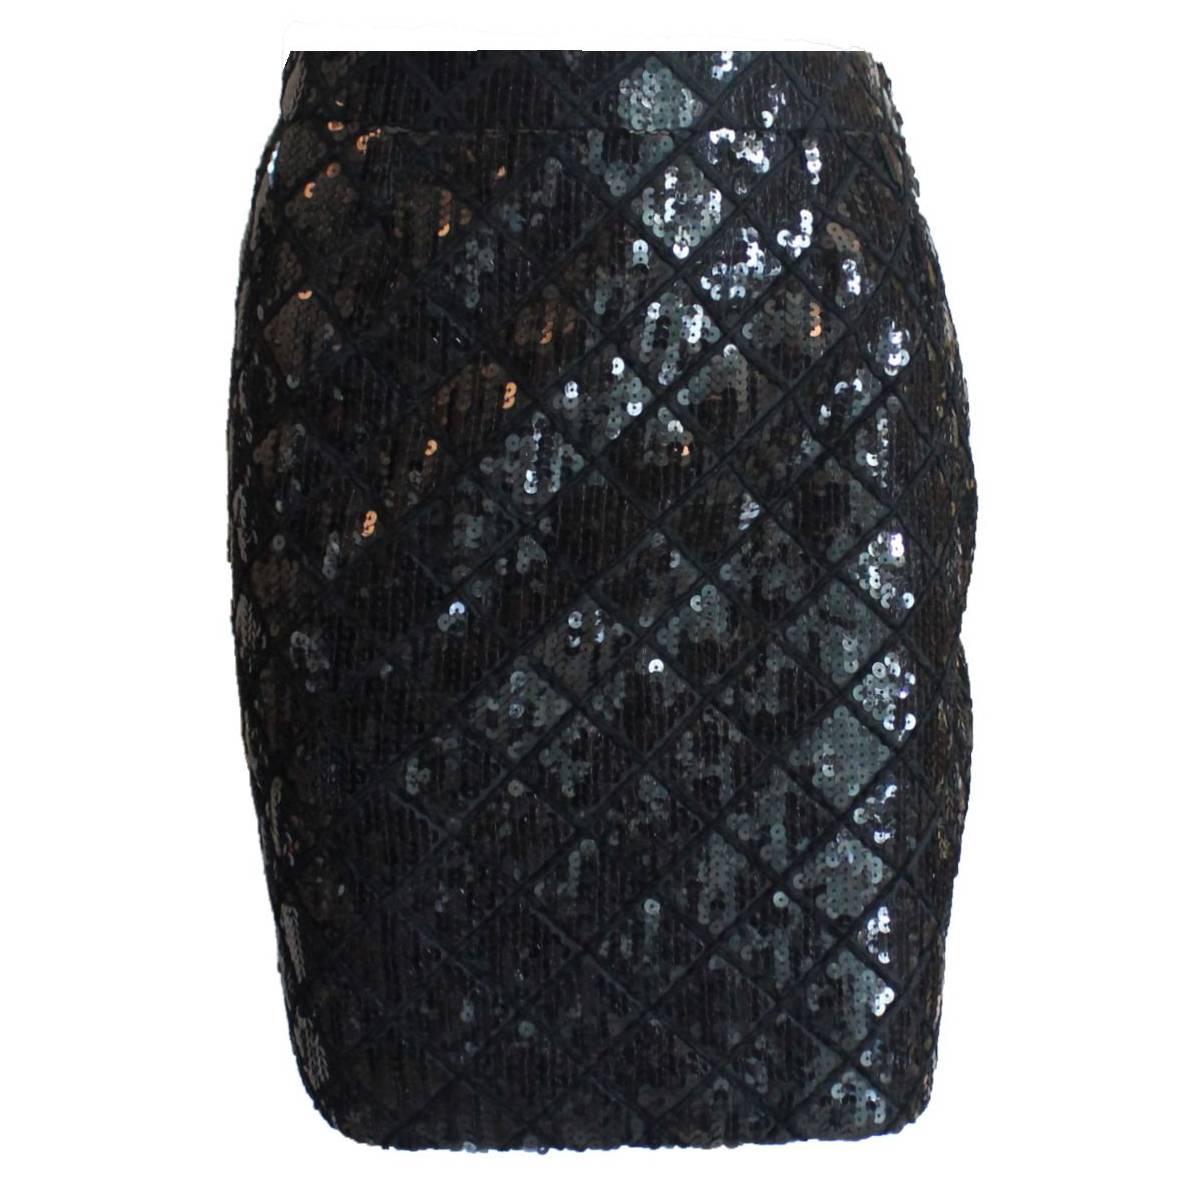 Iconic Chanel Quilted Sequin Skirt by Karl Lagerfeld as seen in Met Museum NYC